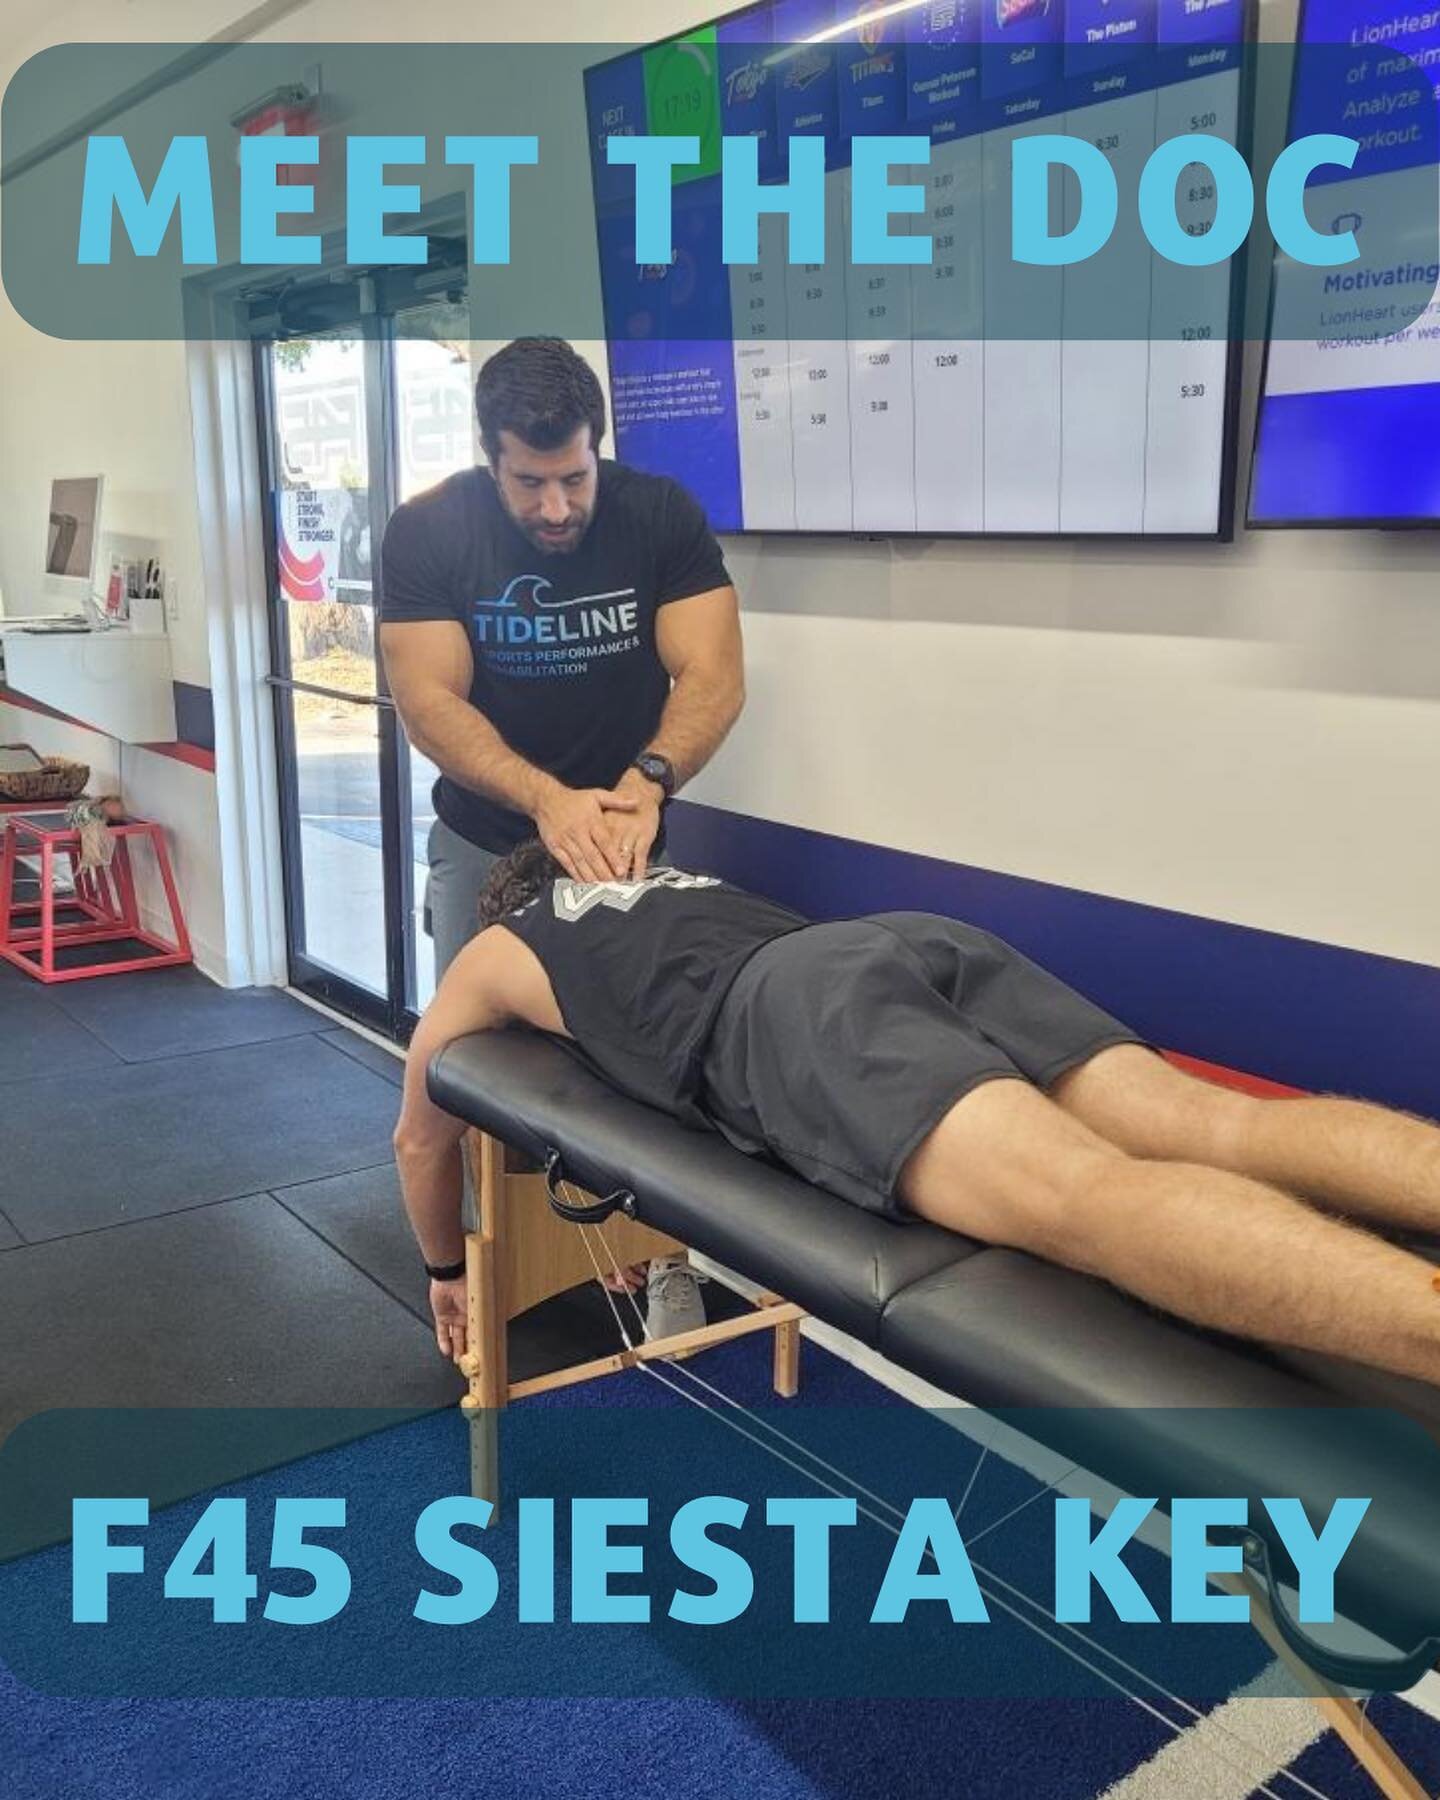 We had a great time working with members from @f45_siestakey_srq at our Meet the Doc event this morning! 

Today&rsquo;s lineup included athletes with low back pain, elbow pain, and knee pain. 

Our team offered injury/mobility screens and talked to 